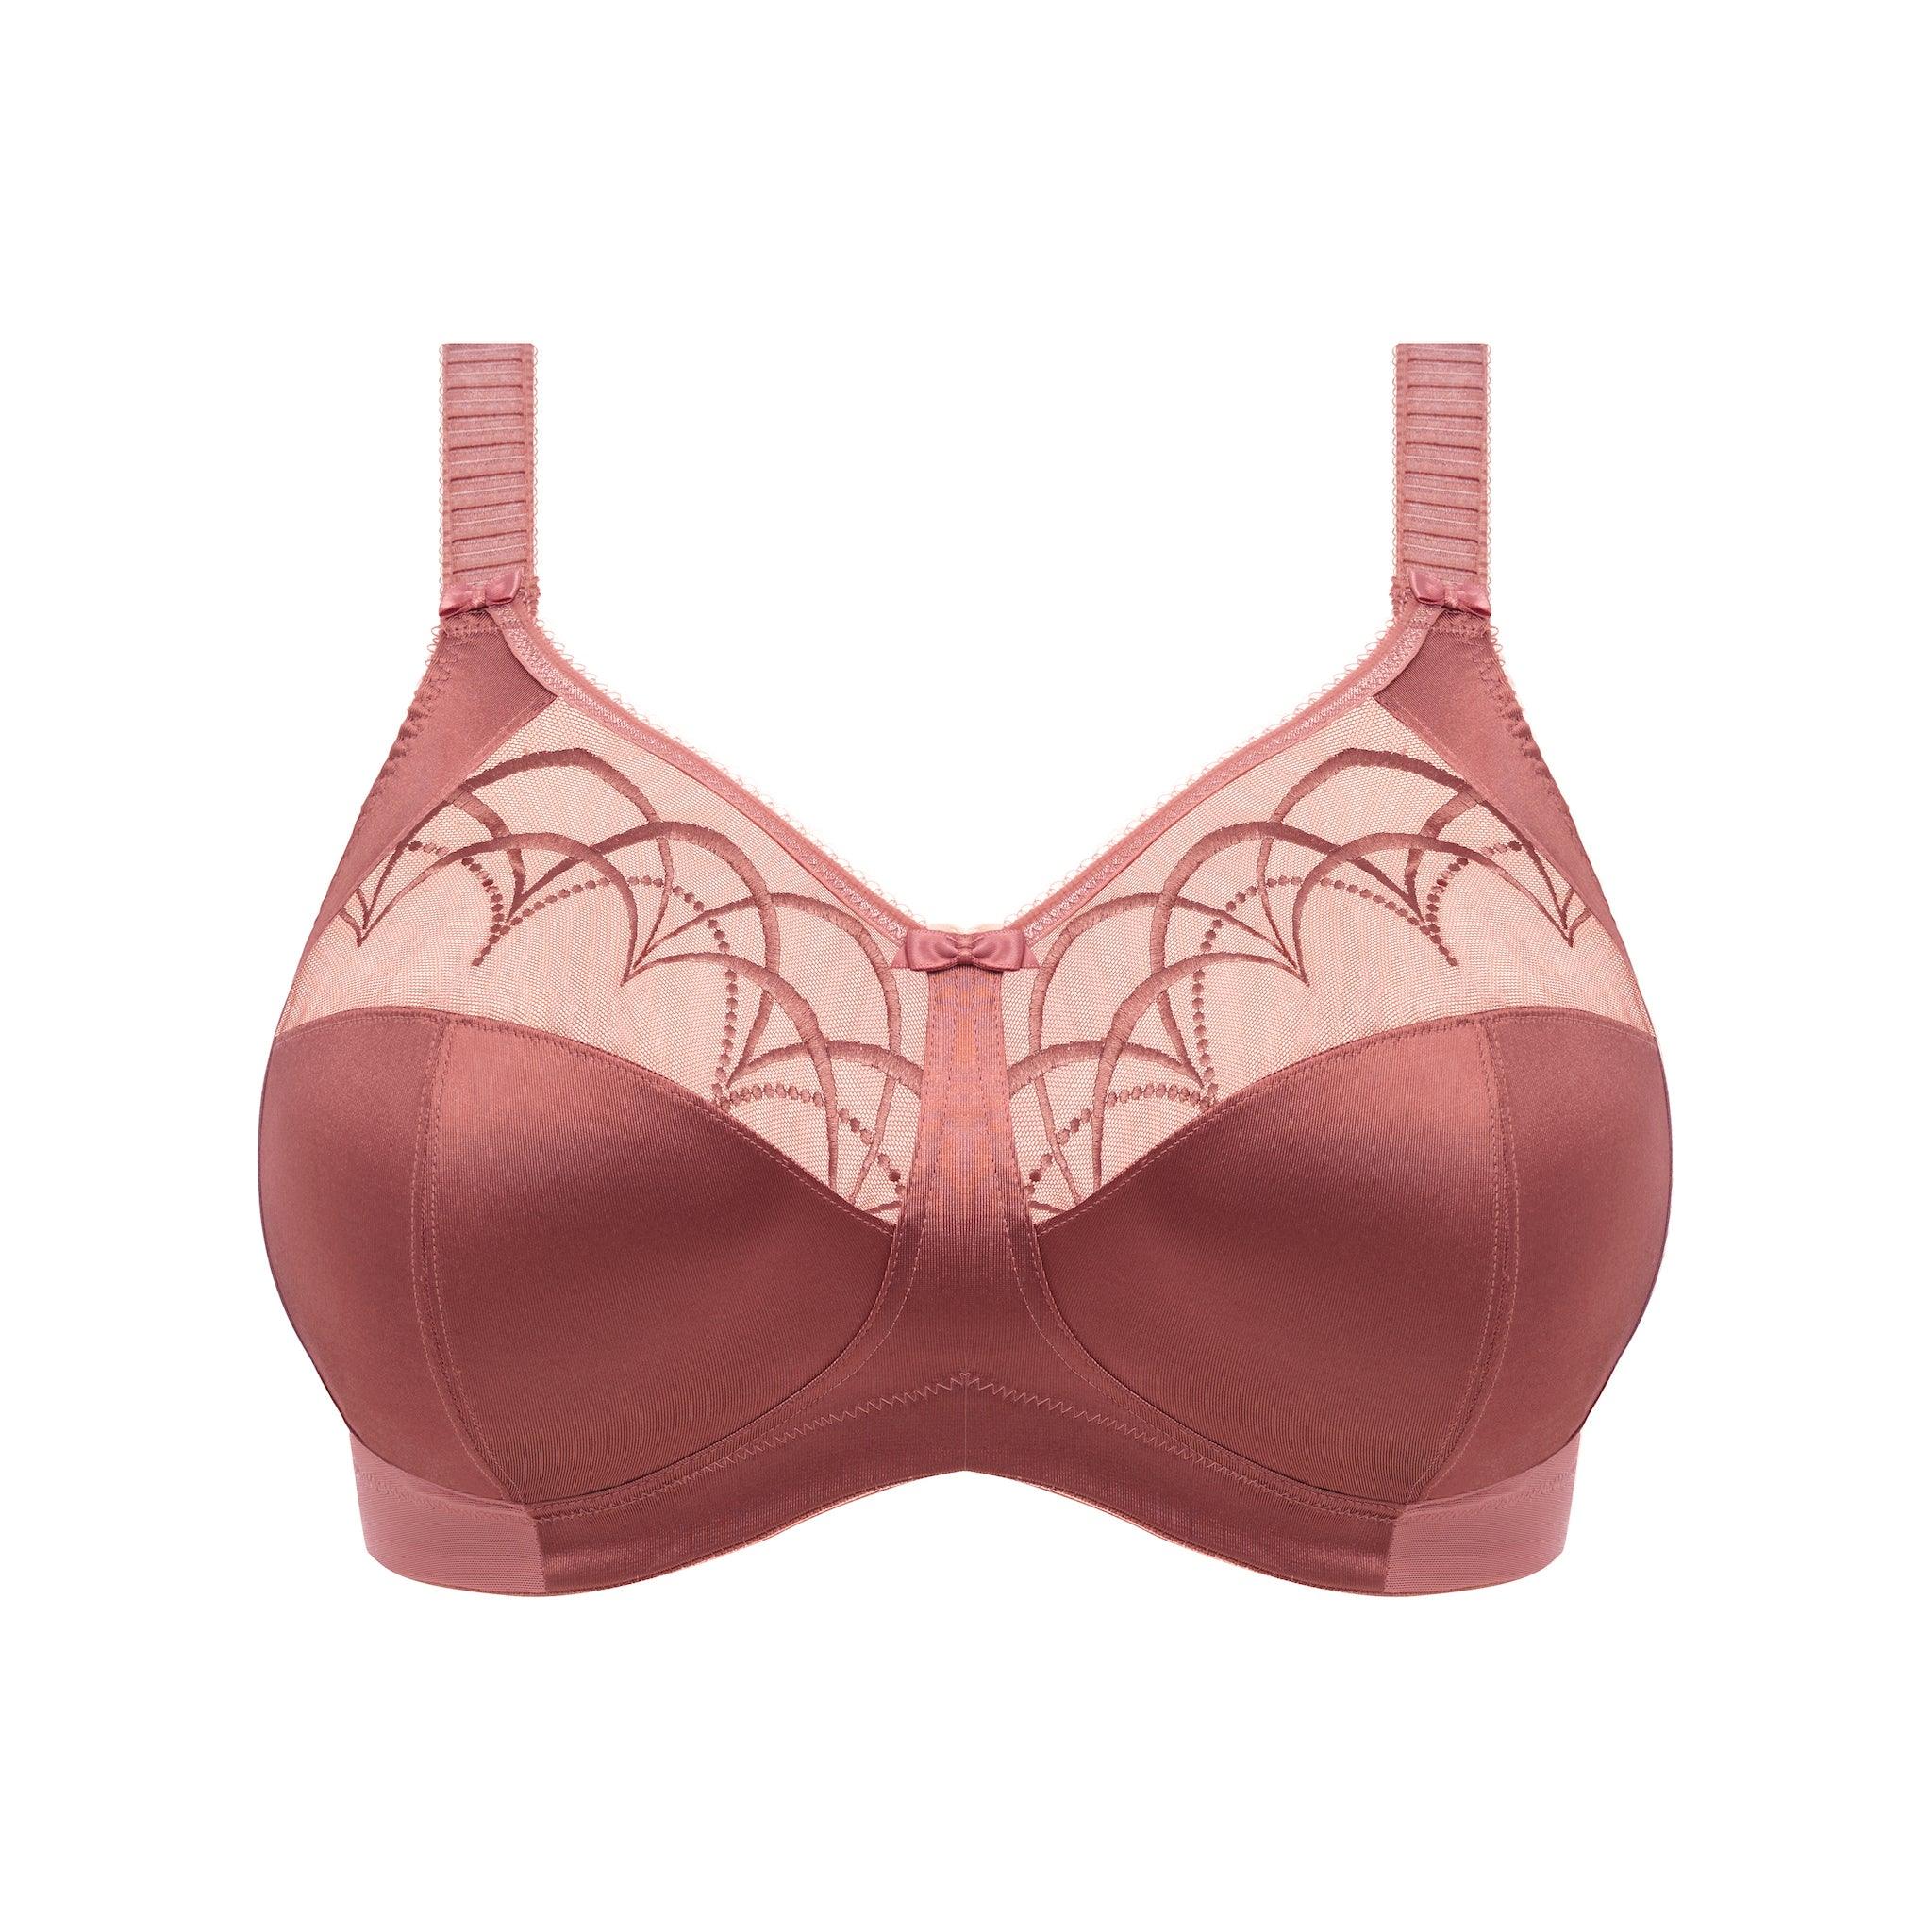 38G Bras by Elomi